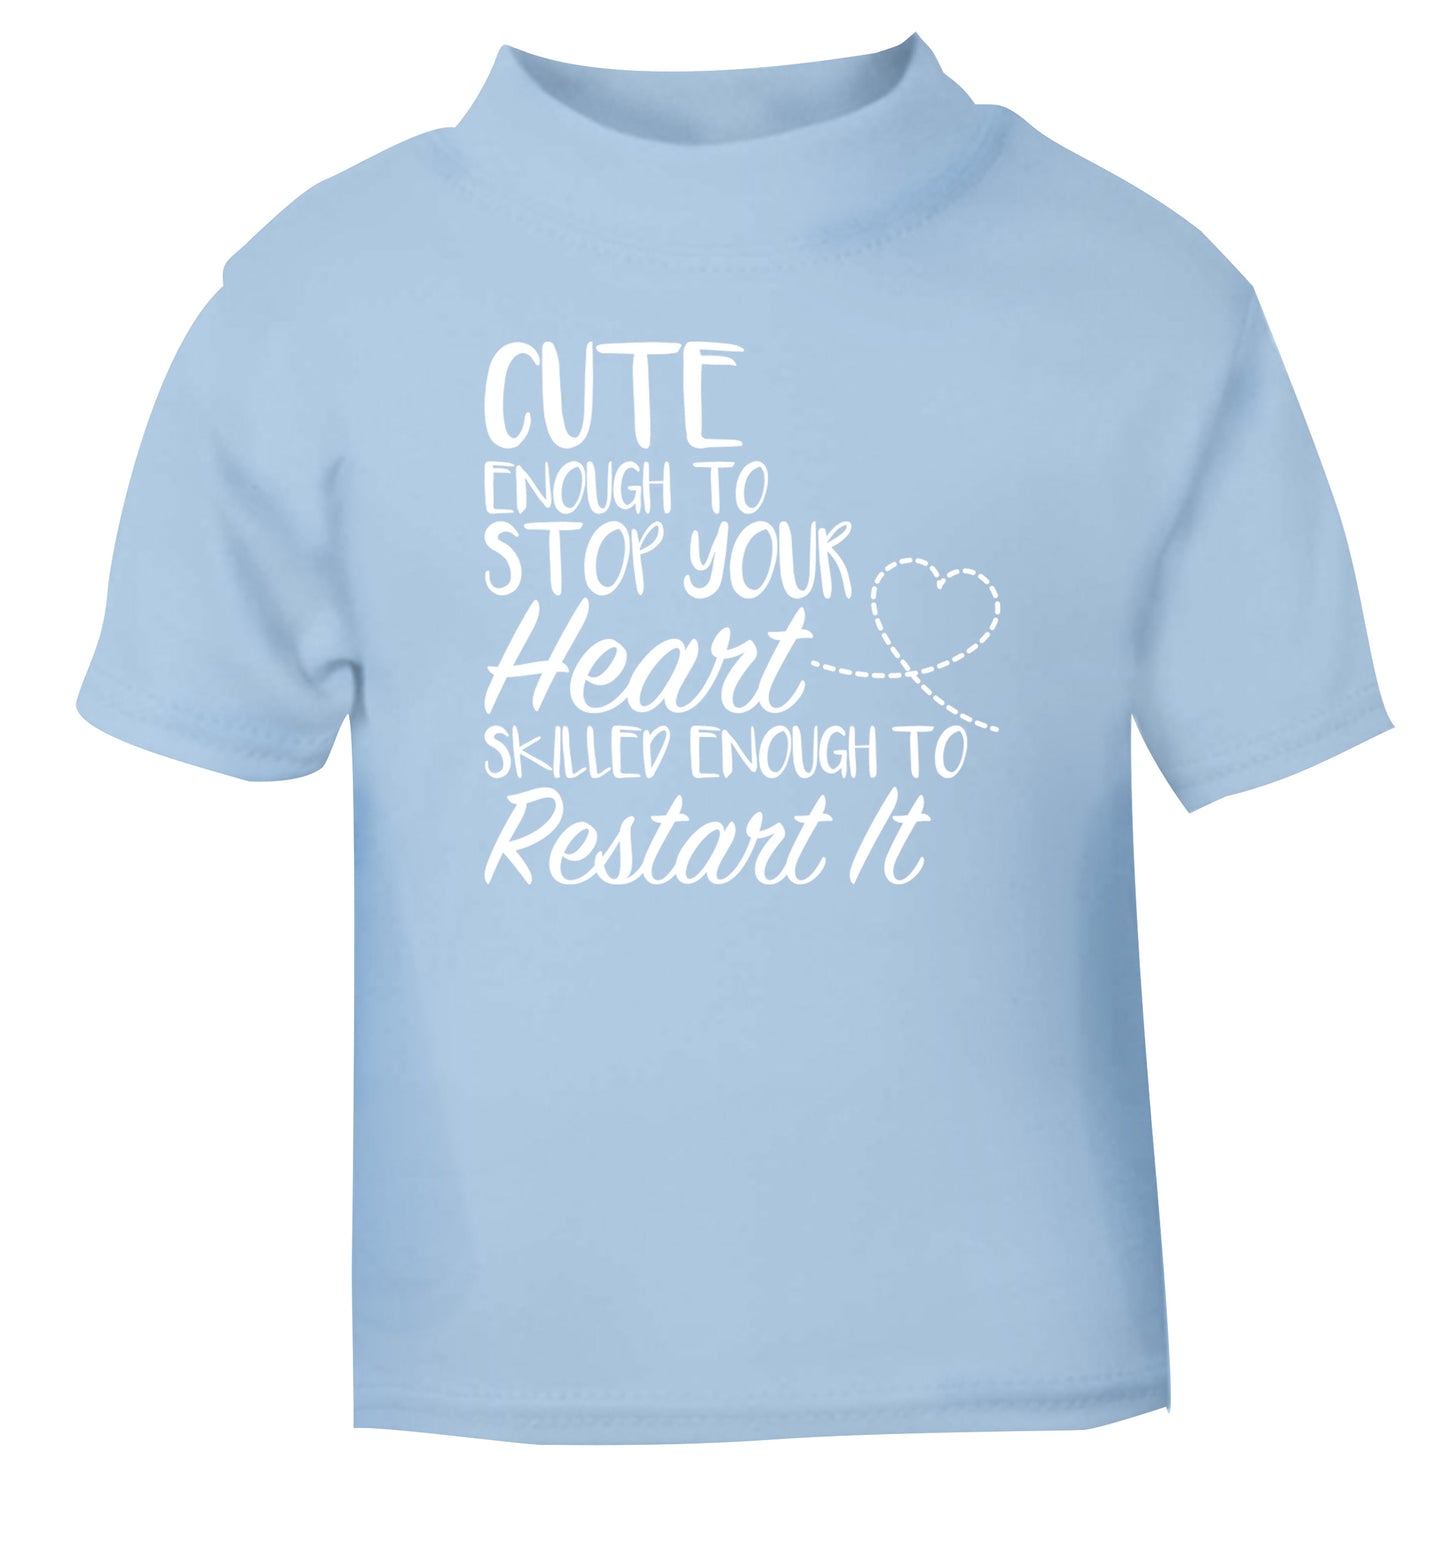 Cute enough to stop your heart skilled enough to restart it light blue Baby Toddler Tshirt 2 Years